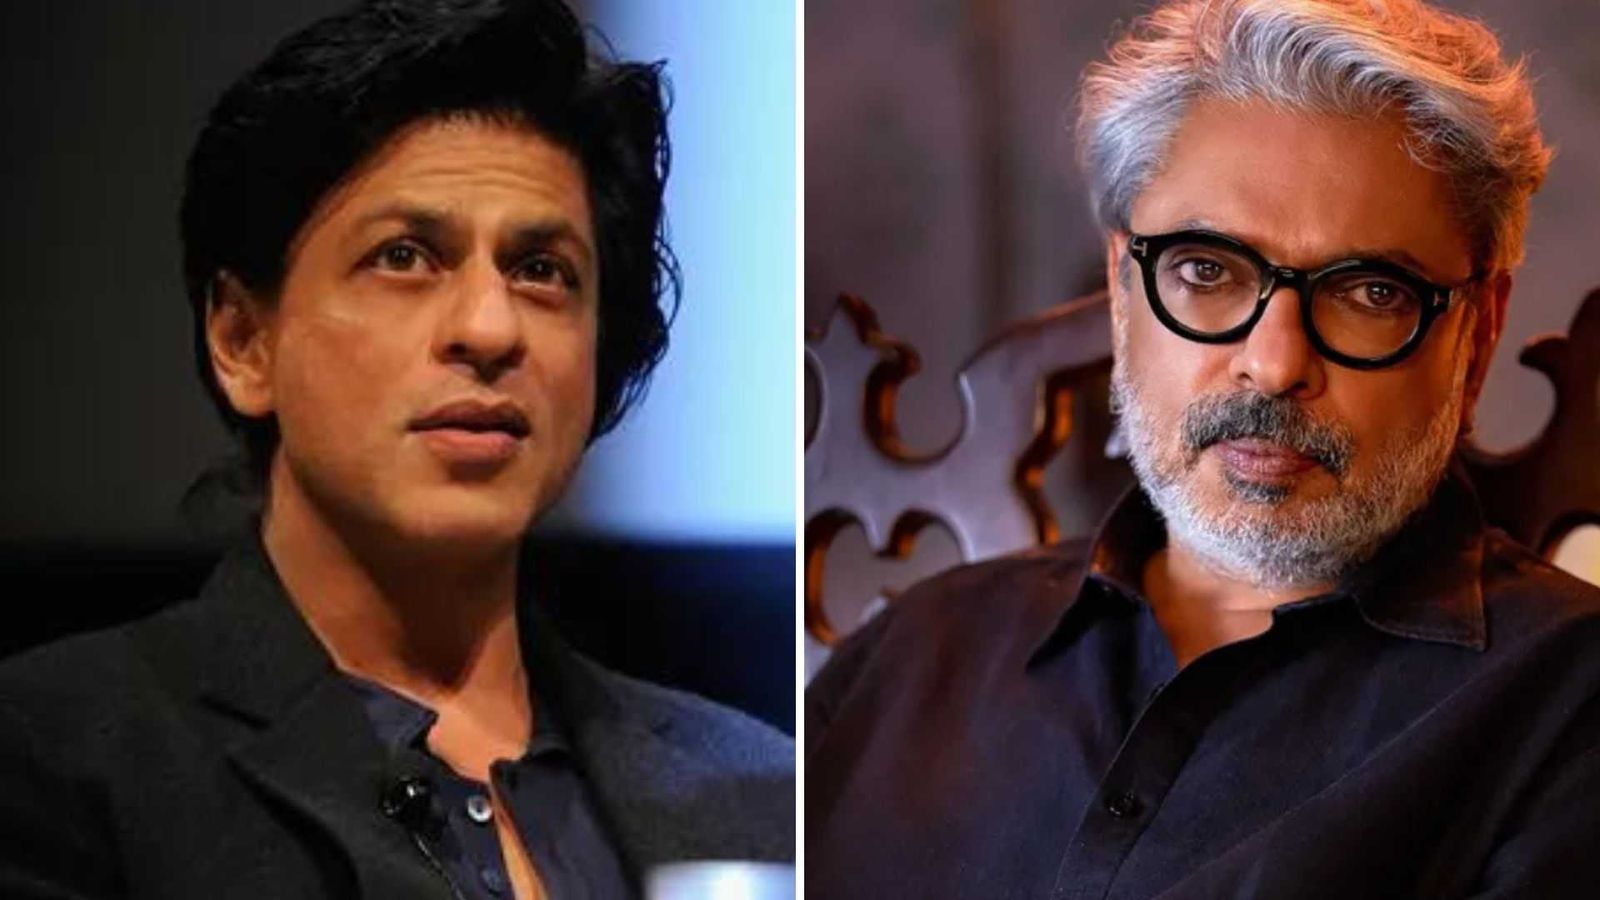 Shah Rukh Khan to revive Sanjay Leela Bhansali's shelved project Inshallah? Here's what we know